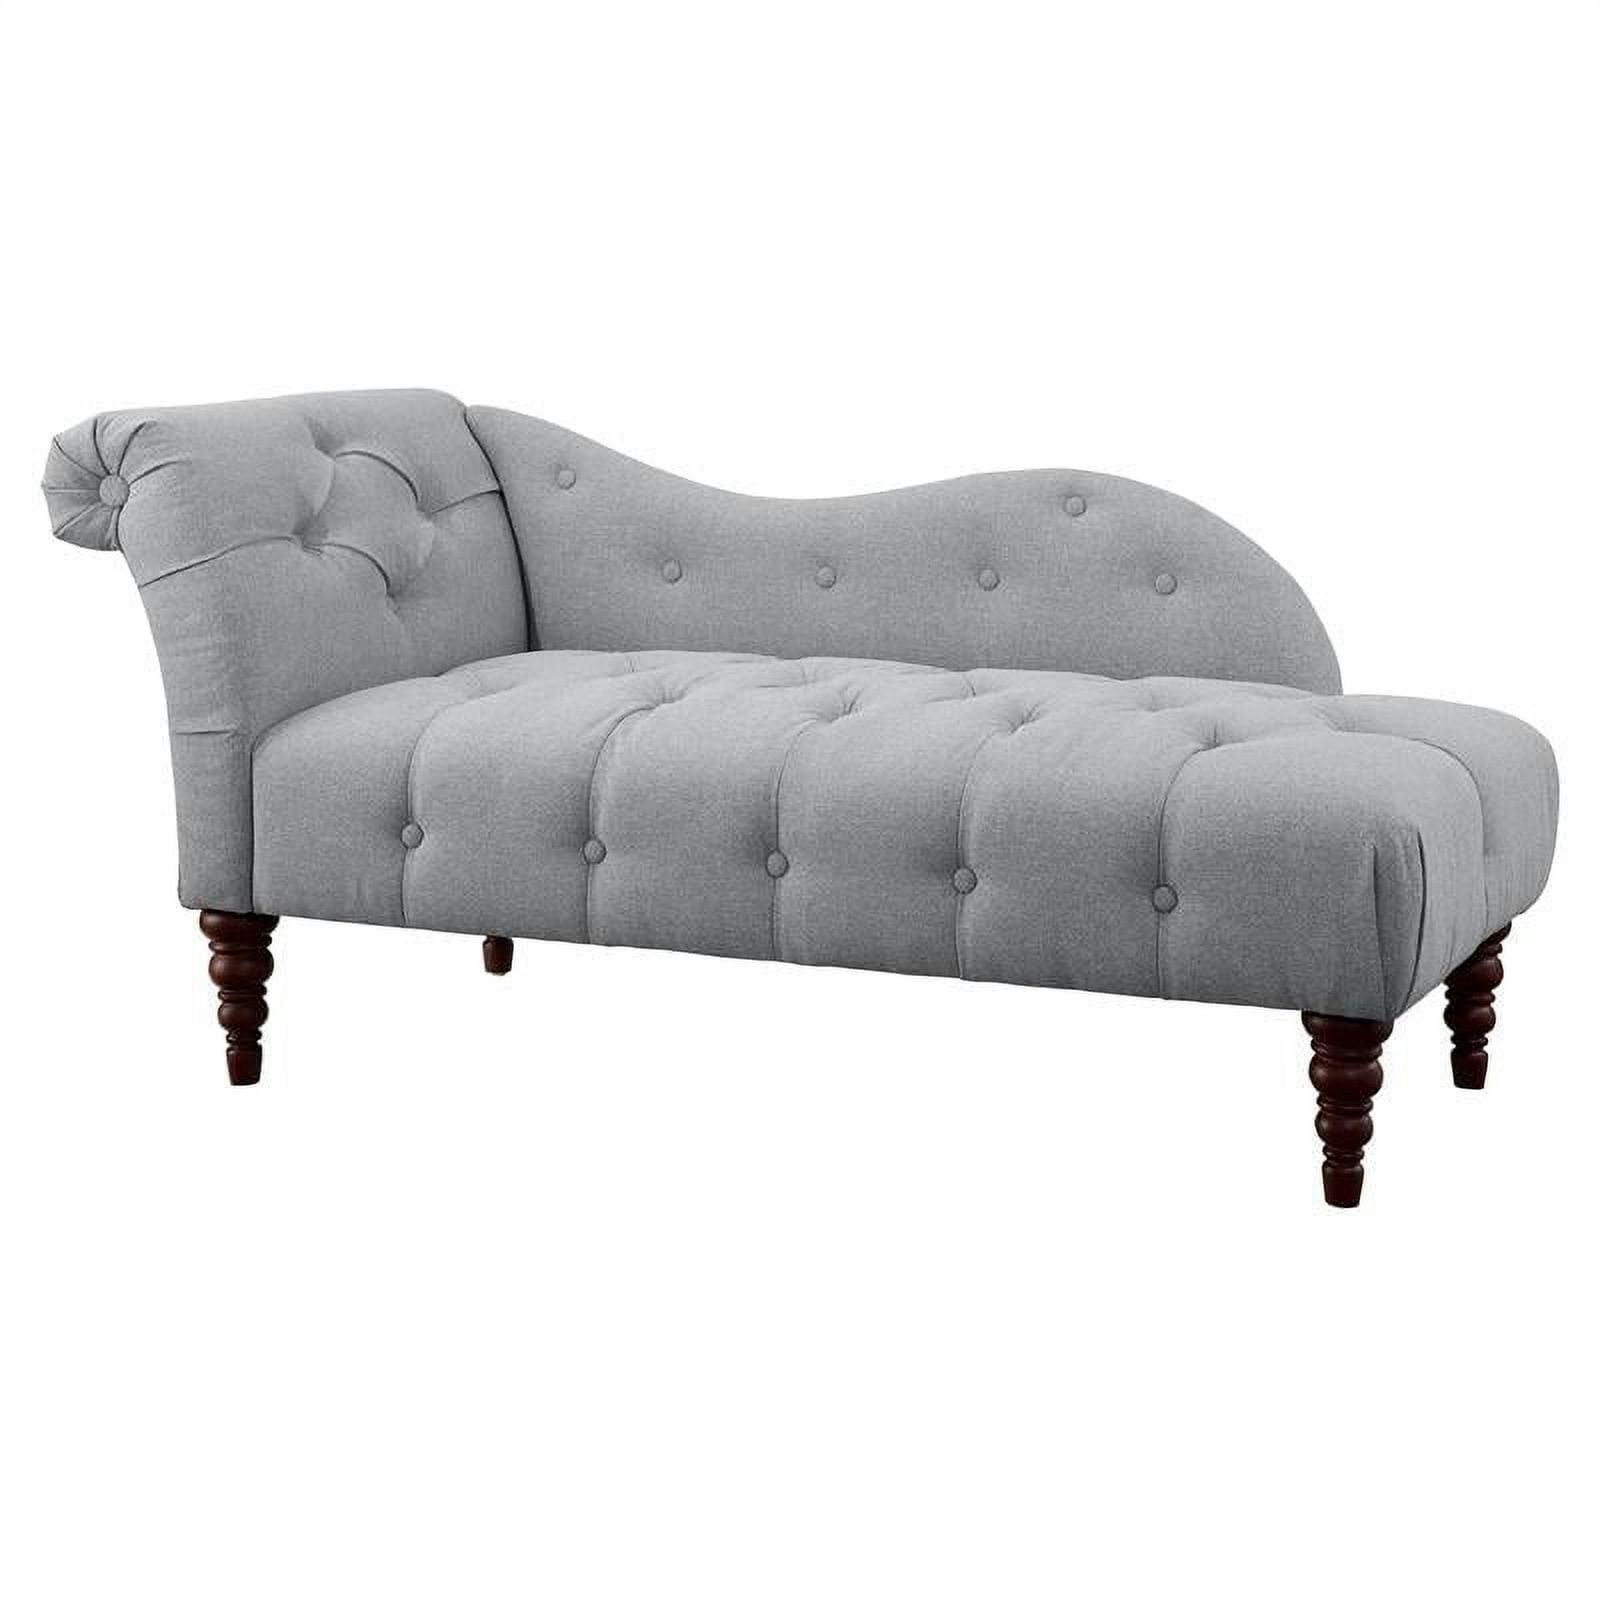 Elegant Dove Gray Button-Tufted Chaise with Espresso Wood Legs